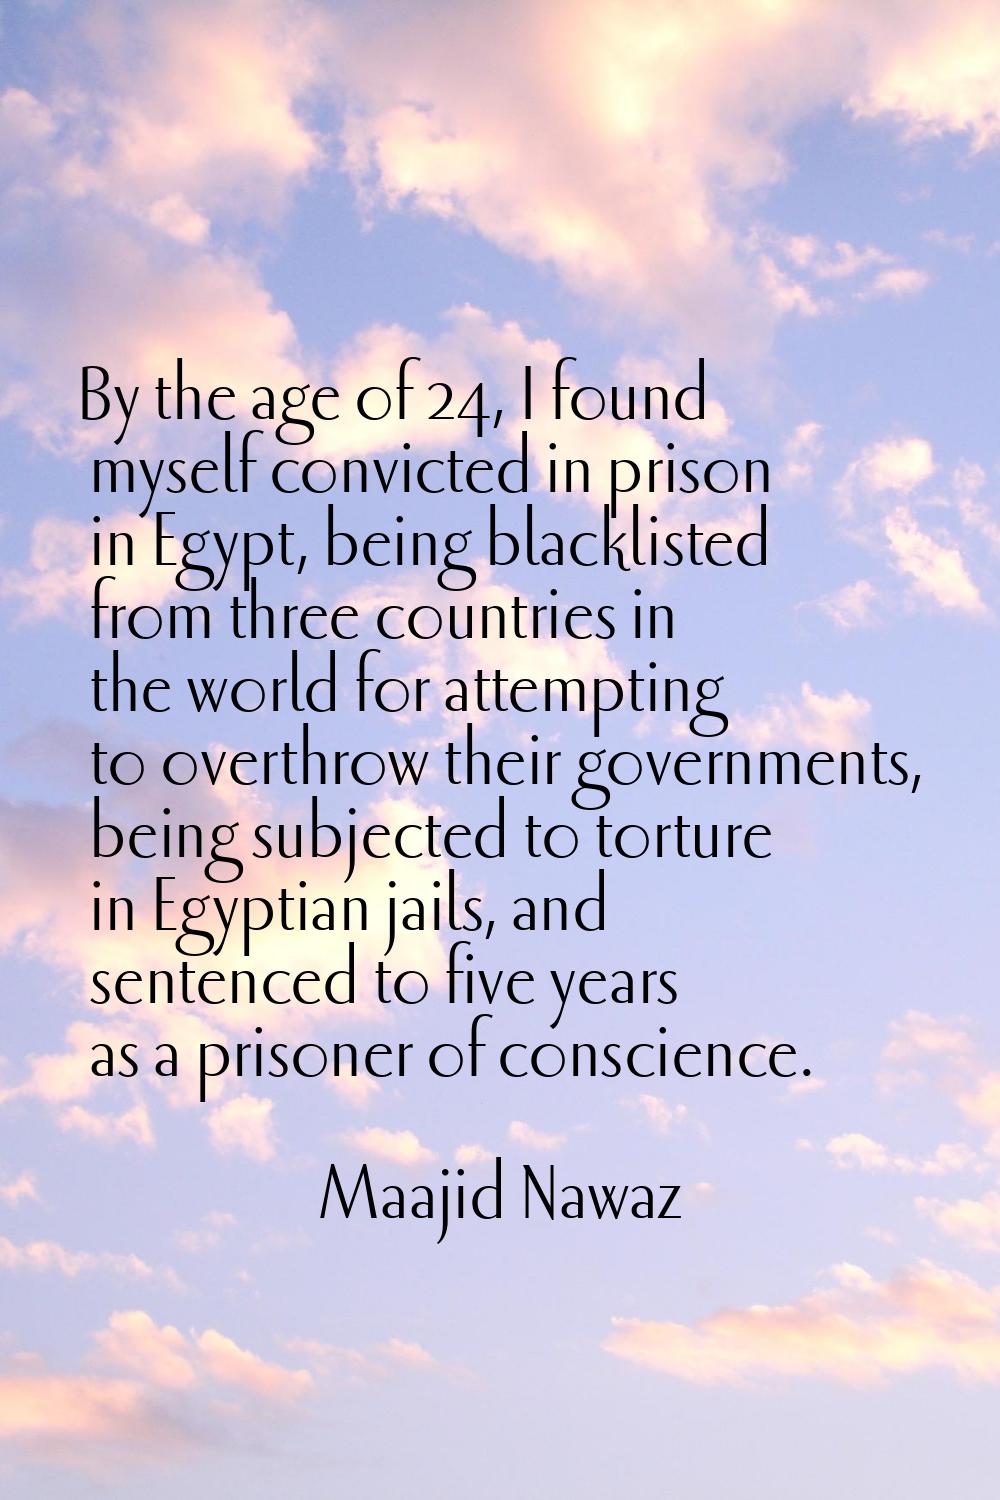 By the age of 24, I found myself convicted in prison in Egypt, being blacklisted from three countri